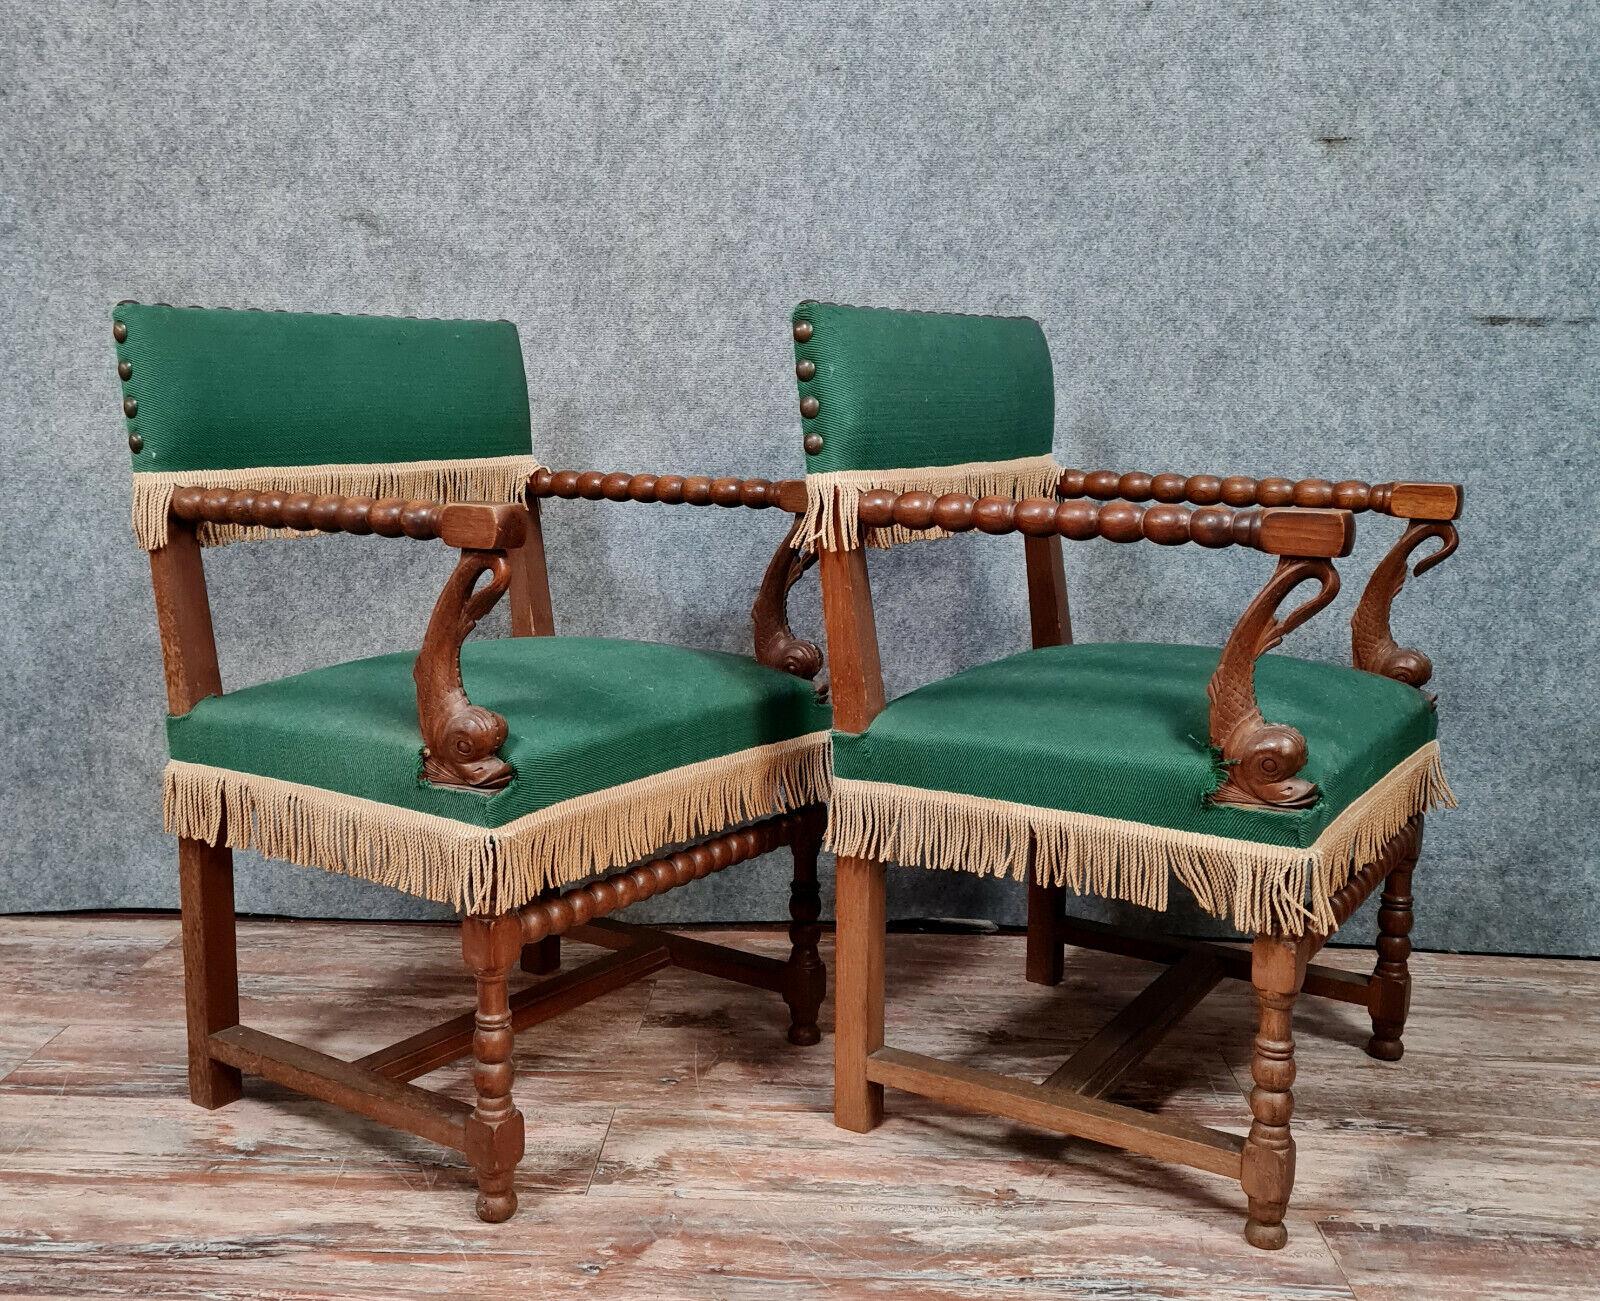 Exquisite Pair of Solid Oak Louis XIII Armchairs from circa 1850s -1X11 For Sale 1